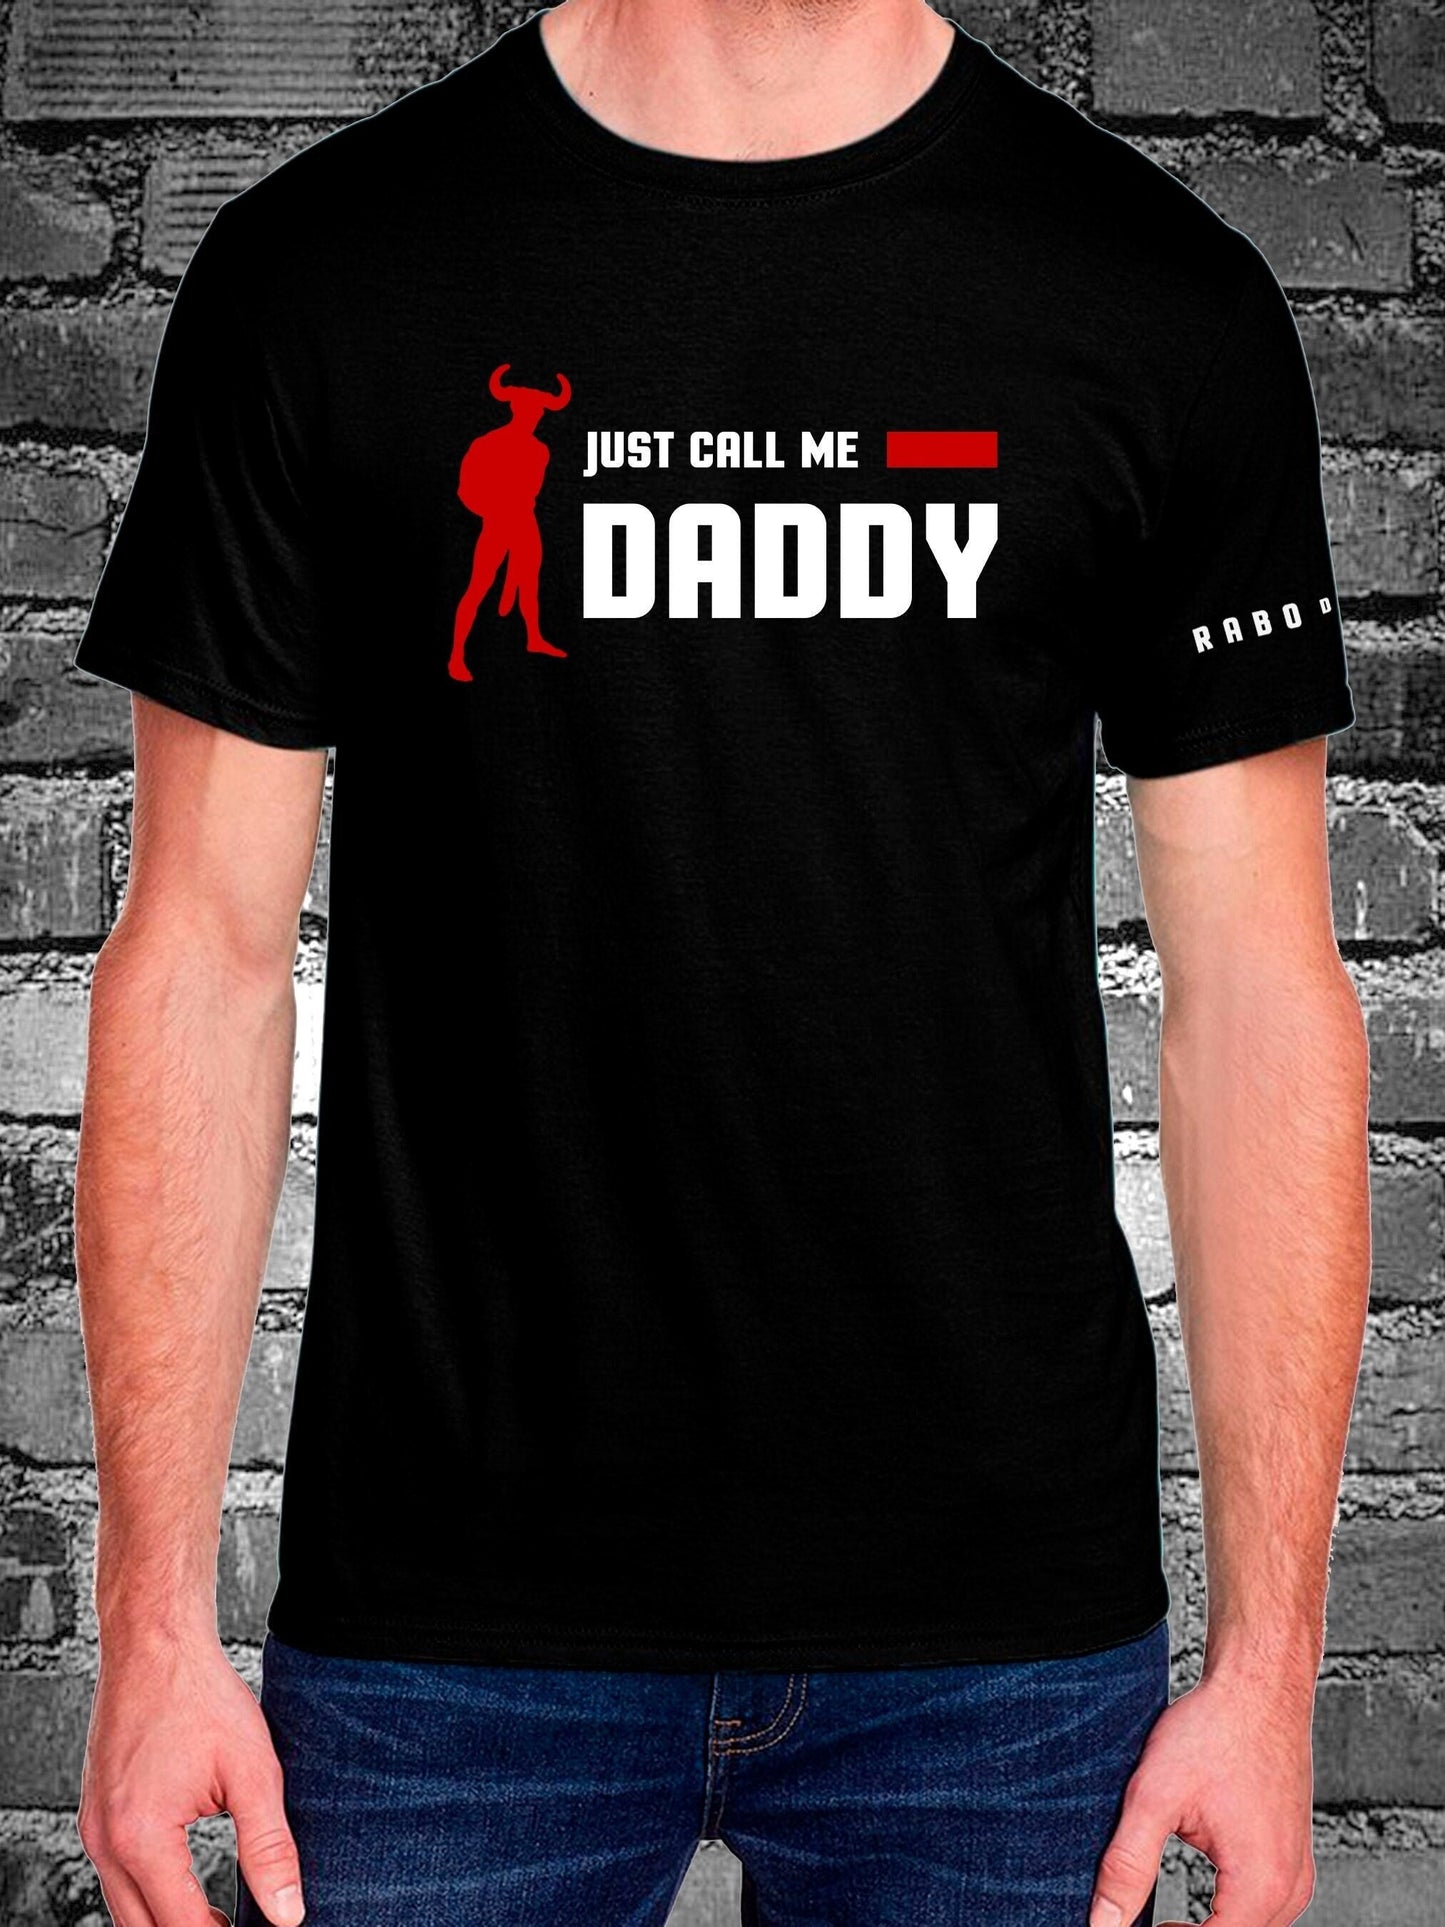 JUST CALL ME DADDY - Black T-Shirt with Horny Minotaur detail